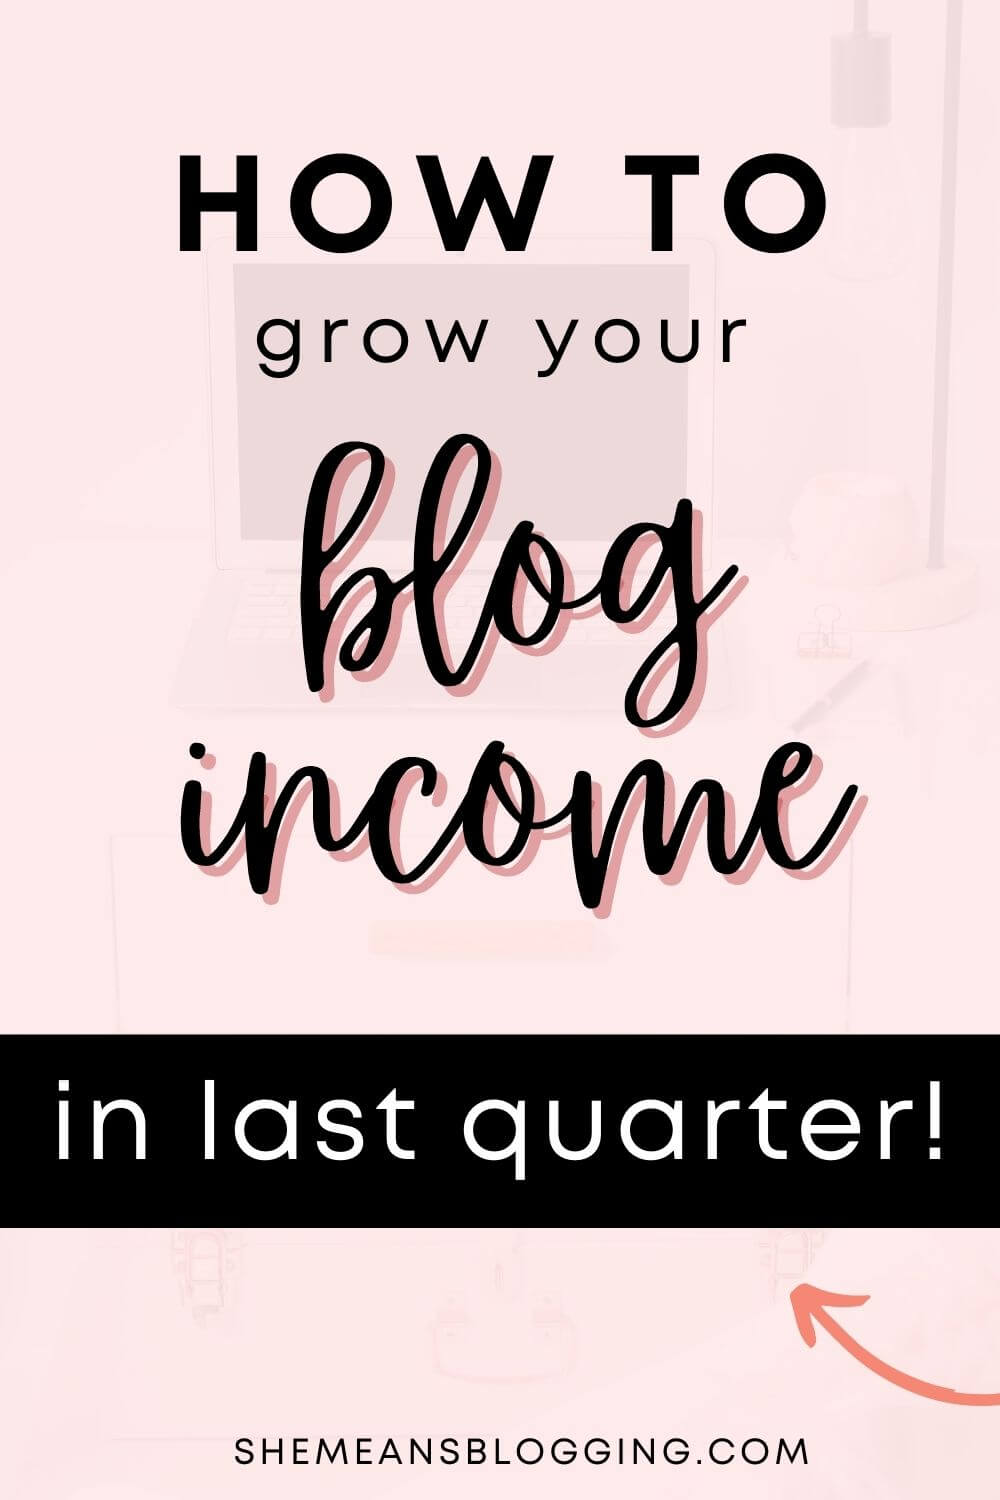 Do you want to increase blog income during holiday season? Do these actionable blogging tasks to grow your blog income in quarter 4! Start making money and increase website traffic this season. Download this free action list #makemoneyblogging